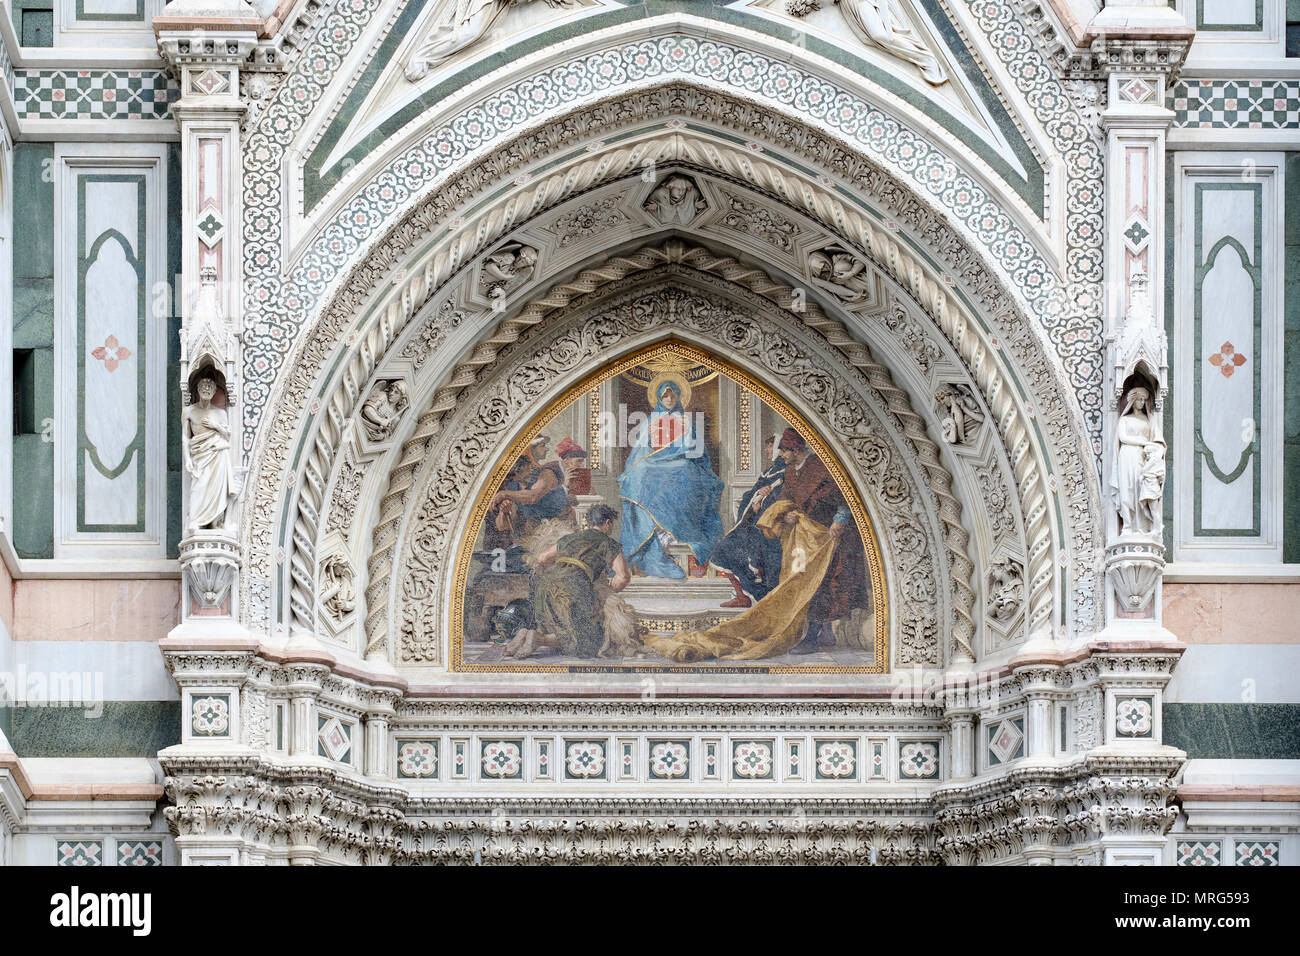 Mosaic of Virgin Mary on the facade of the Cattedrale di Santa Maria del Fiore, Cathedral of Saint Mary of the Flower, Florence, Tuscany, Italy, Europ Stock Photo